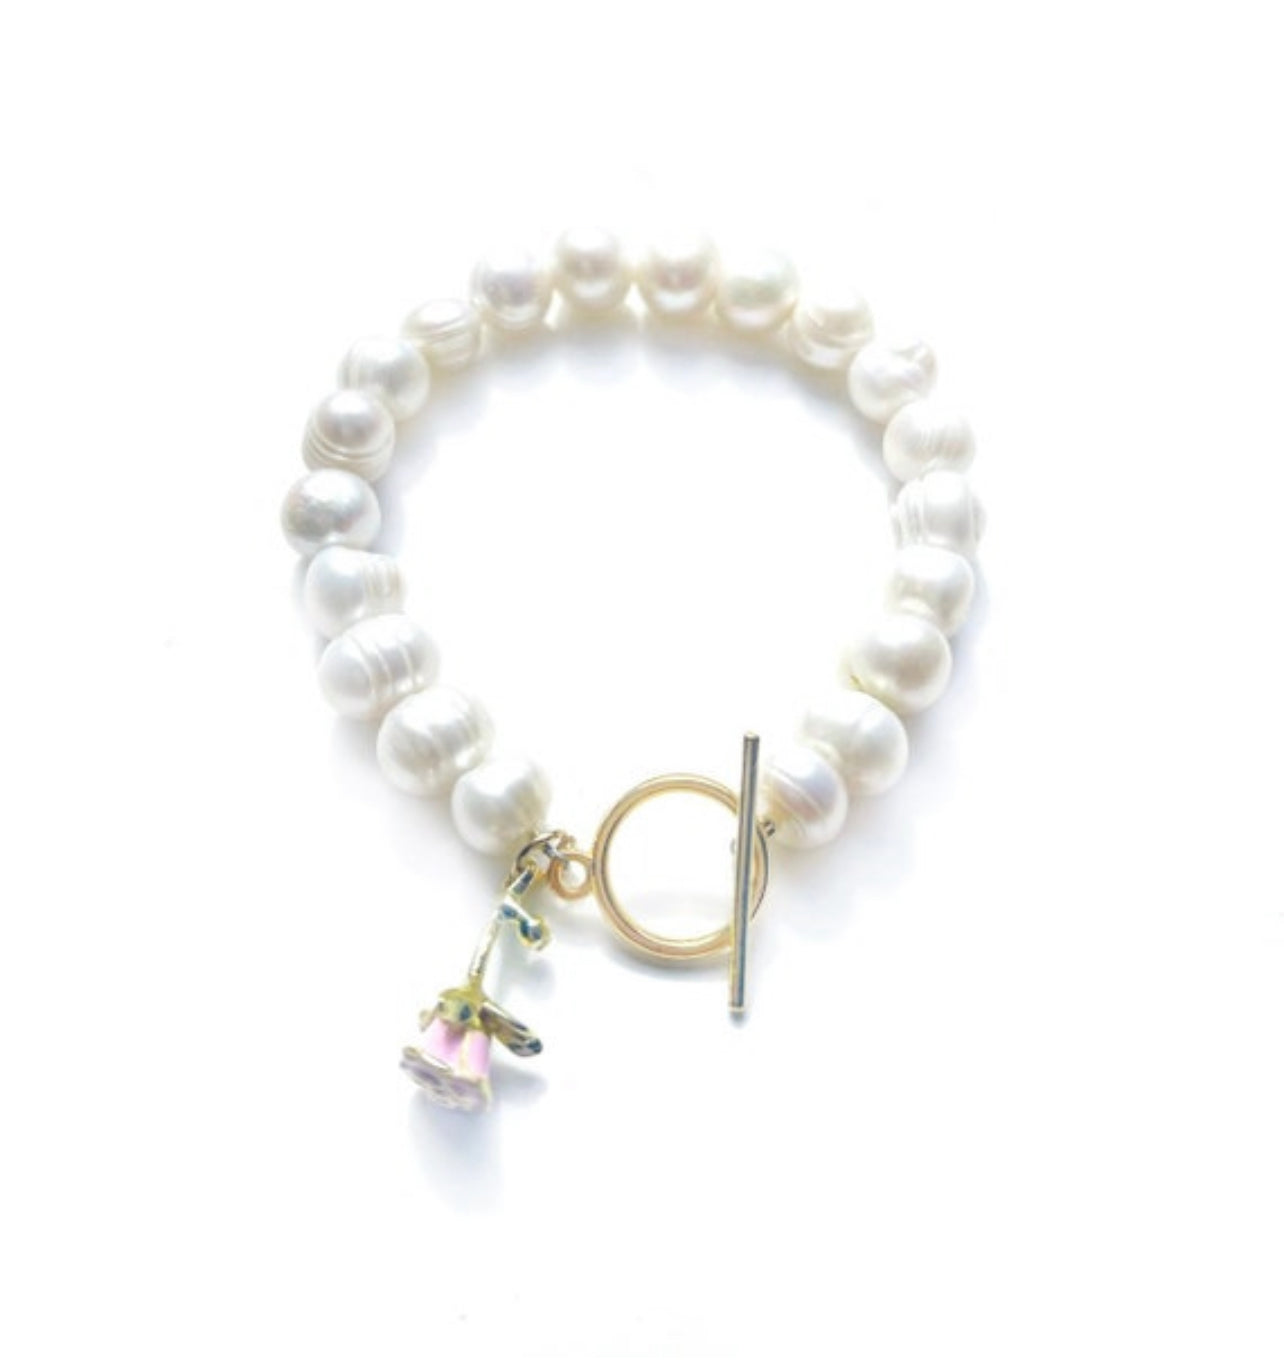 White freshwater pearl choker charm bracelet with rose flower charm and toggle clasp / birthday gifts for her